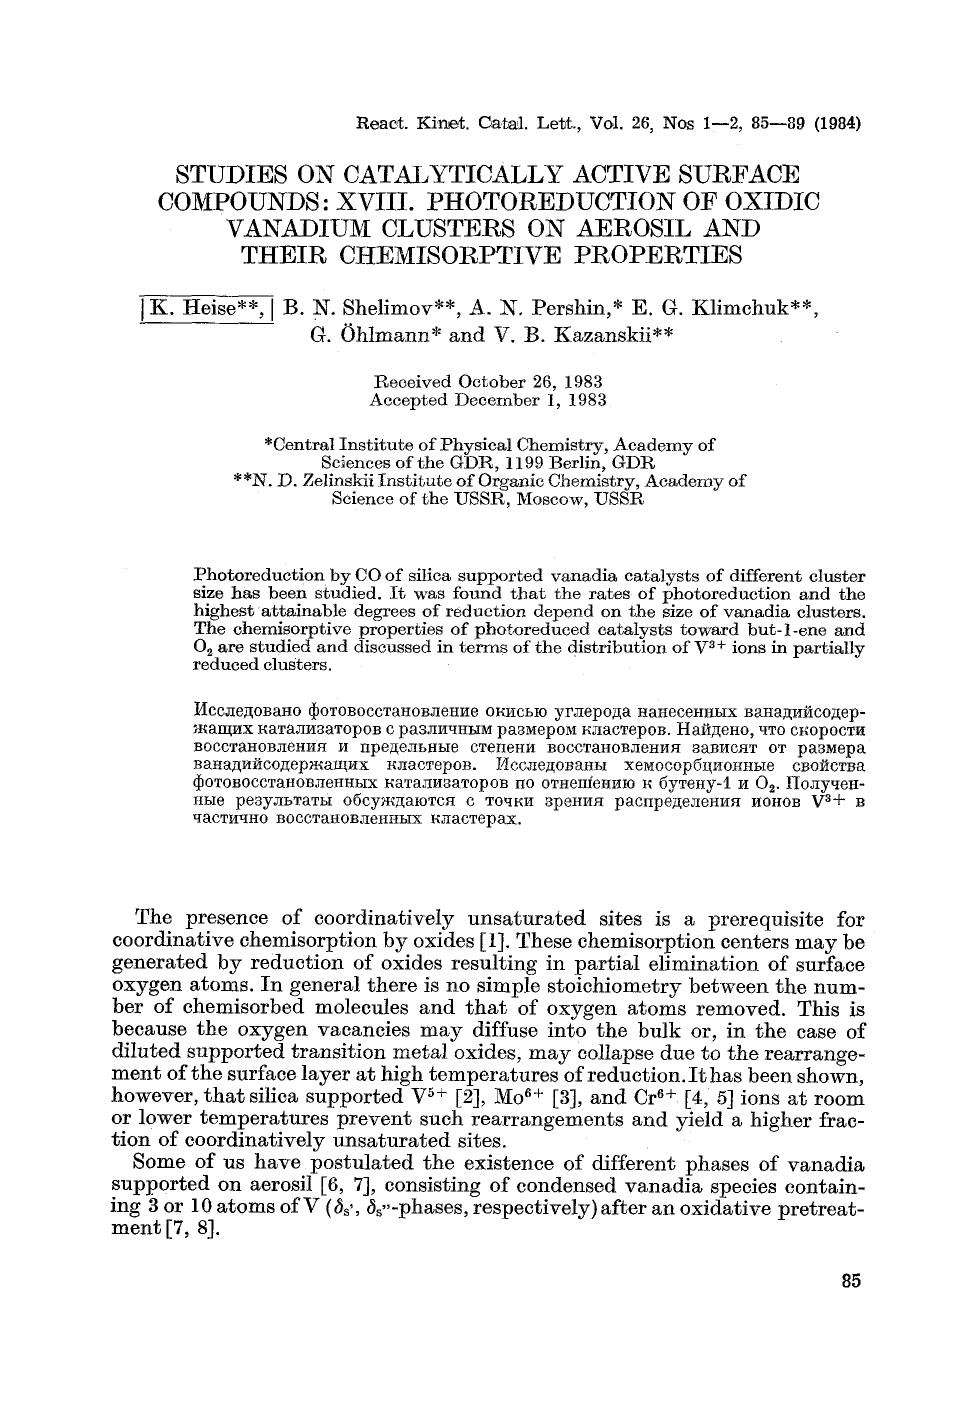 Studies on catalytically active surface compounds: XVIII. Photoreduction of oxidic vanadium clusters on aerosil and their chemisorptive properties by Unknown